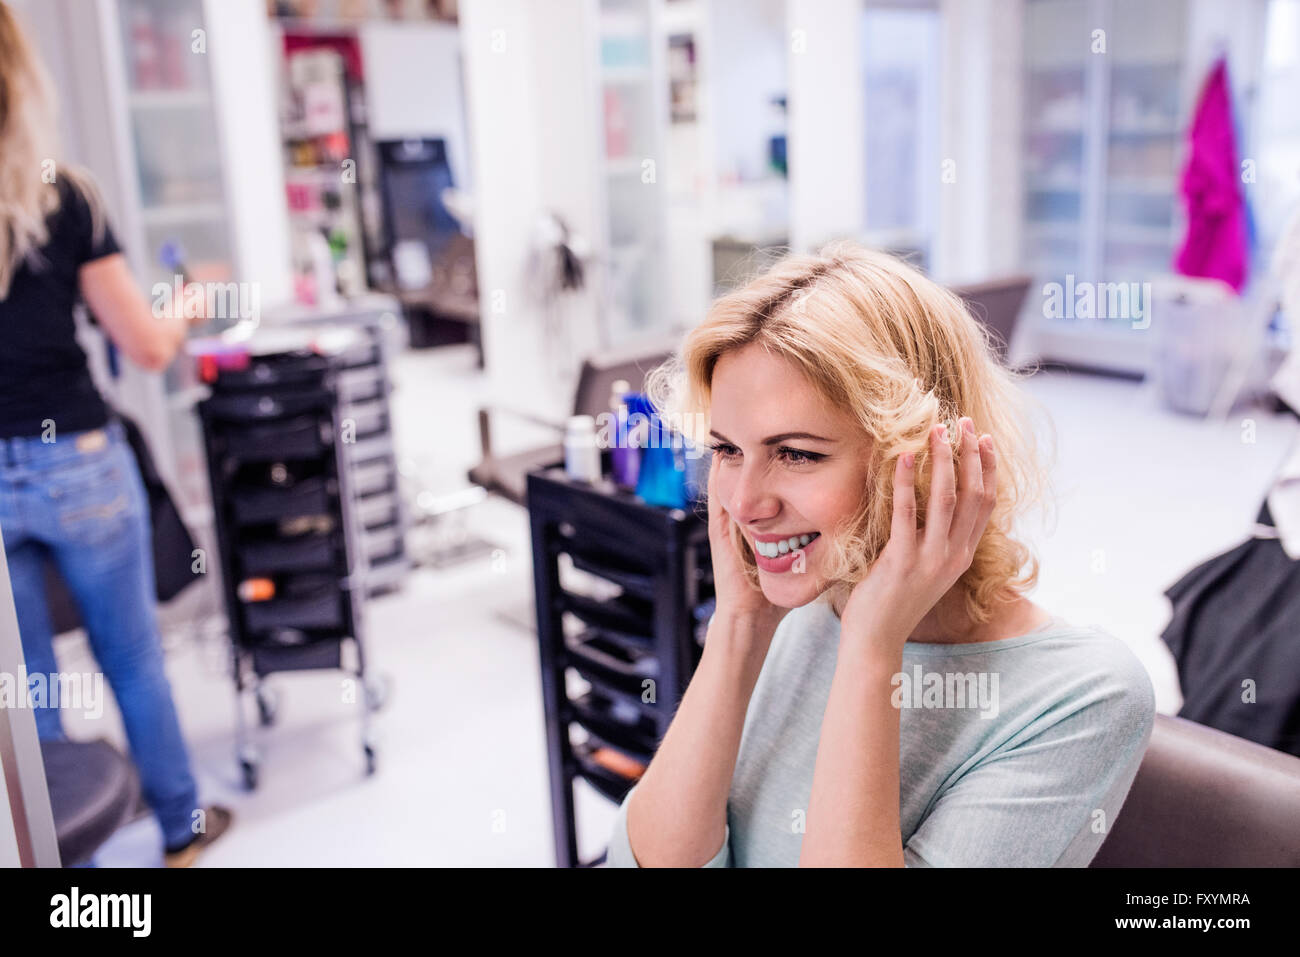 Young blond woman at hairdresser salon with new haircut Stock Photo